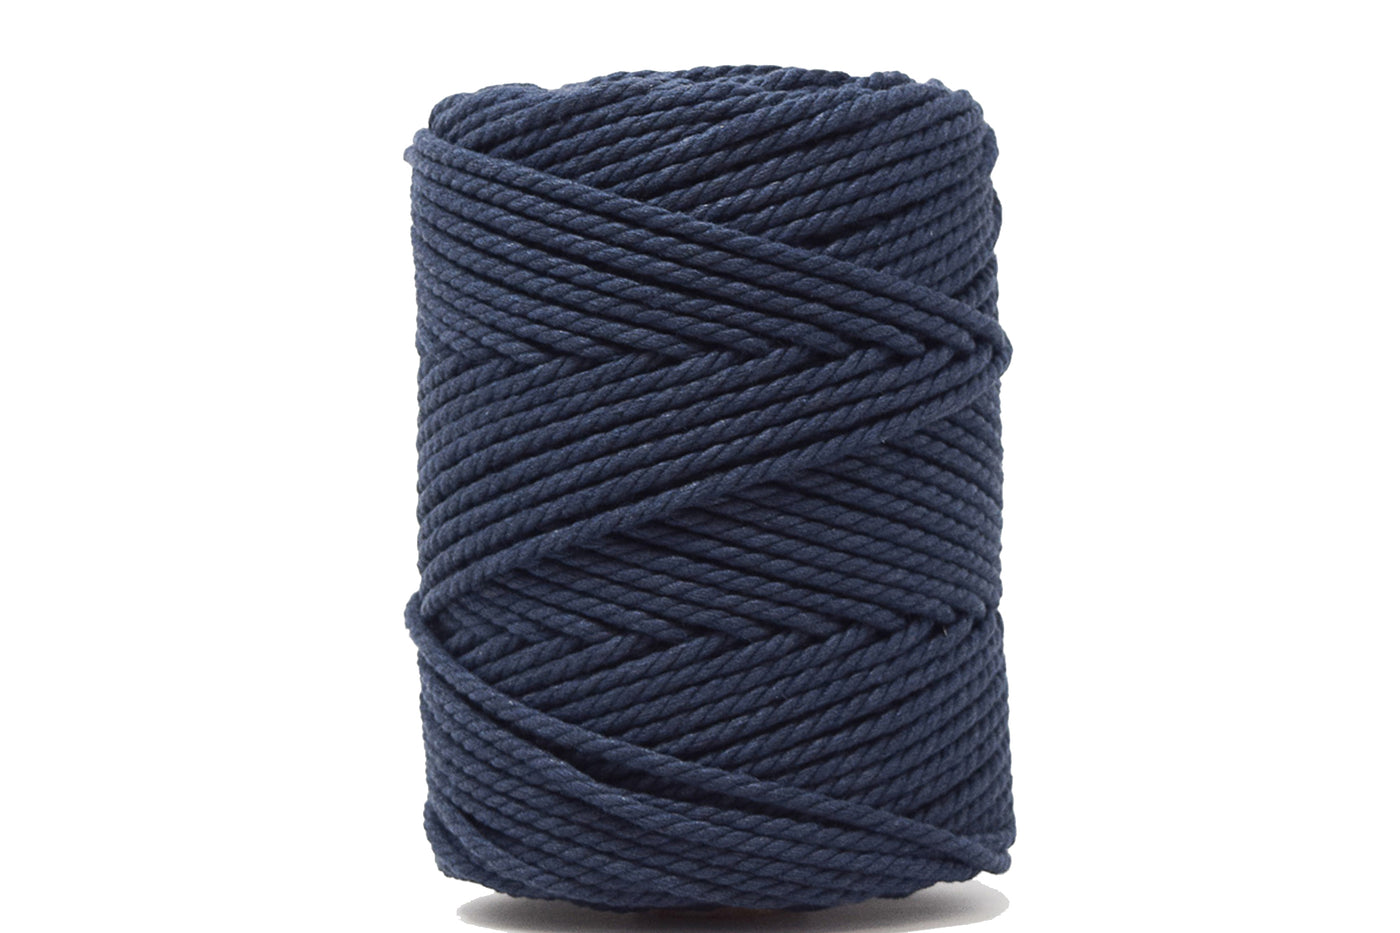 COTTON ROPE ZERO WASTE 3 MM - 3 PLY - NAVY BLUE COLOR